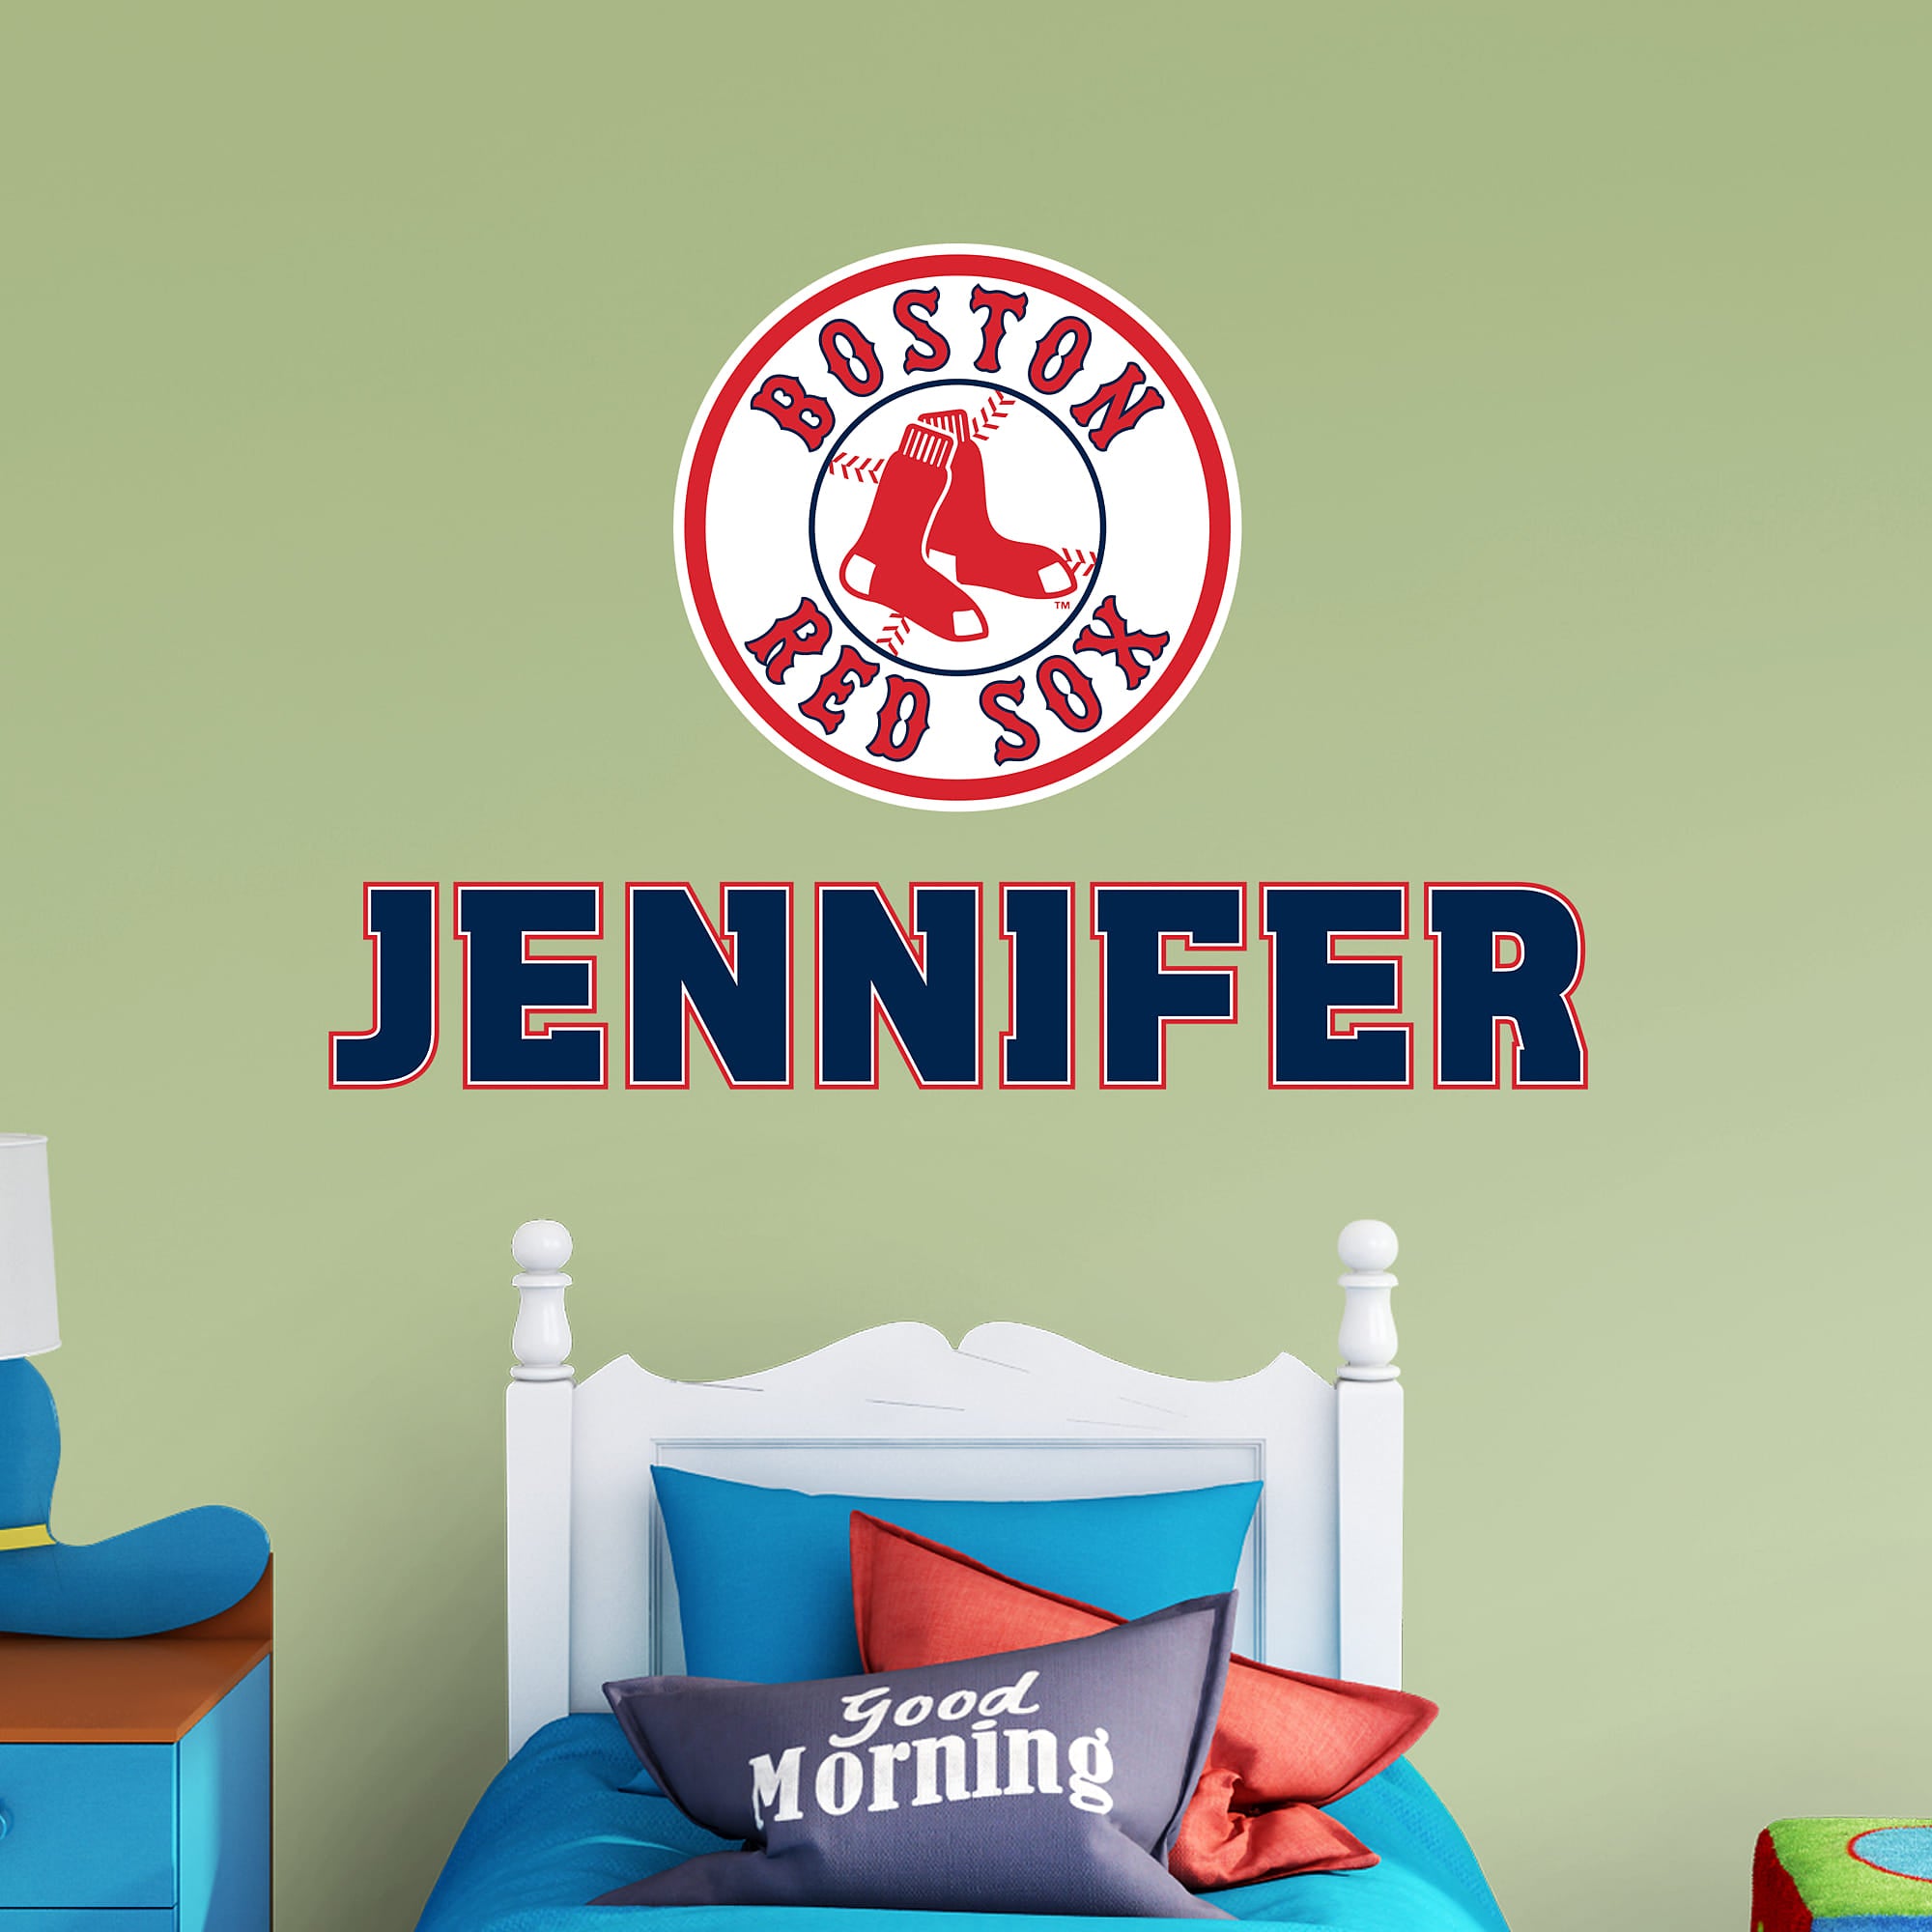 Boston Red Sox: Circle Stacked Personalized Name - Officially Licensed MLB Transfer Decal in Navy (52"W x 39.5"H) by Fathead | V